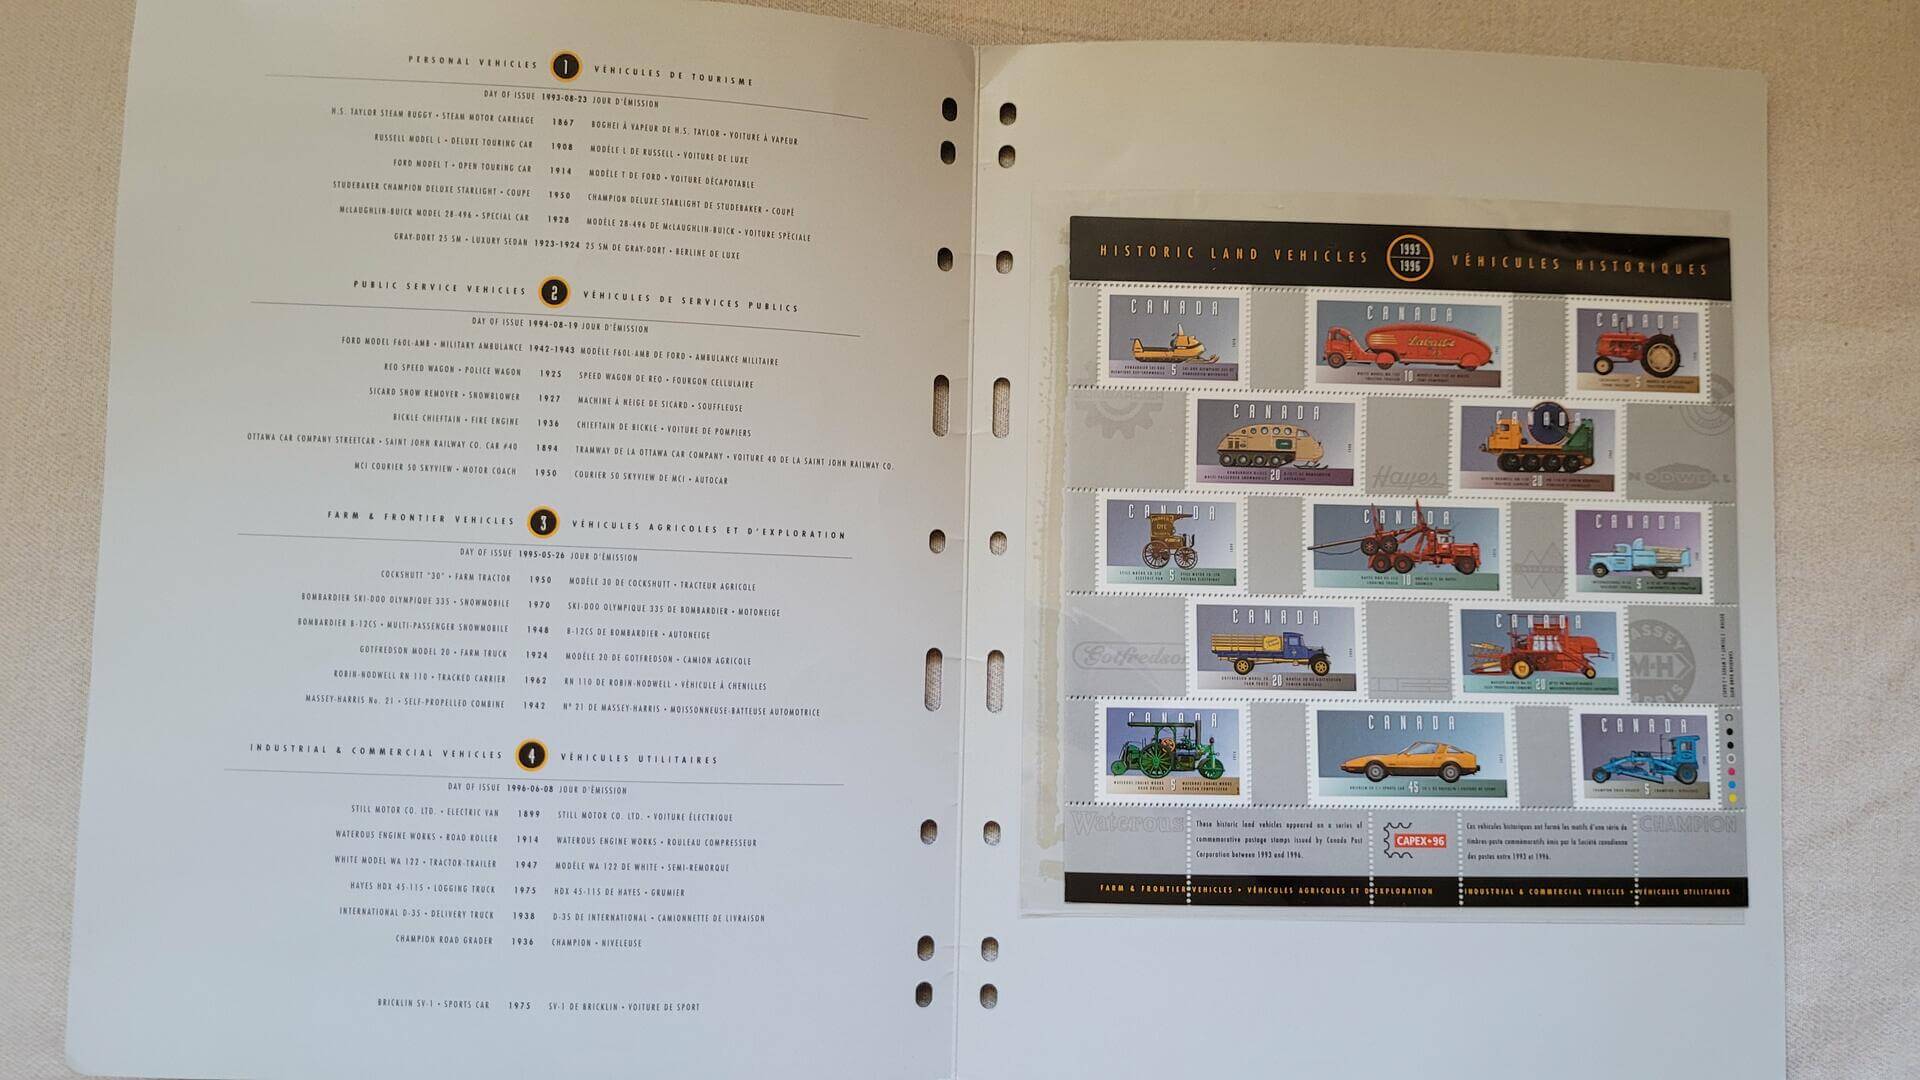 1993-1996 Historic Land Vehicles by Canada Post, official 25 Stamp Pane Thematic Collection #72. Vintage Canadian philately collectible souvenir set